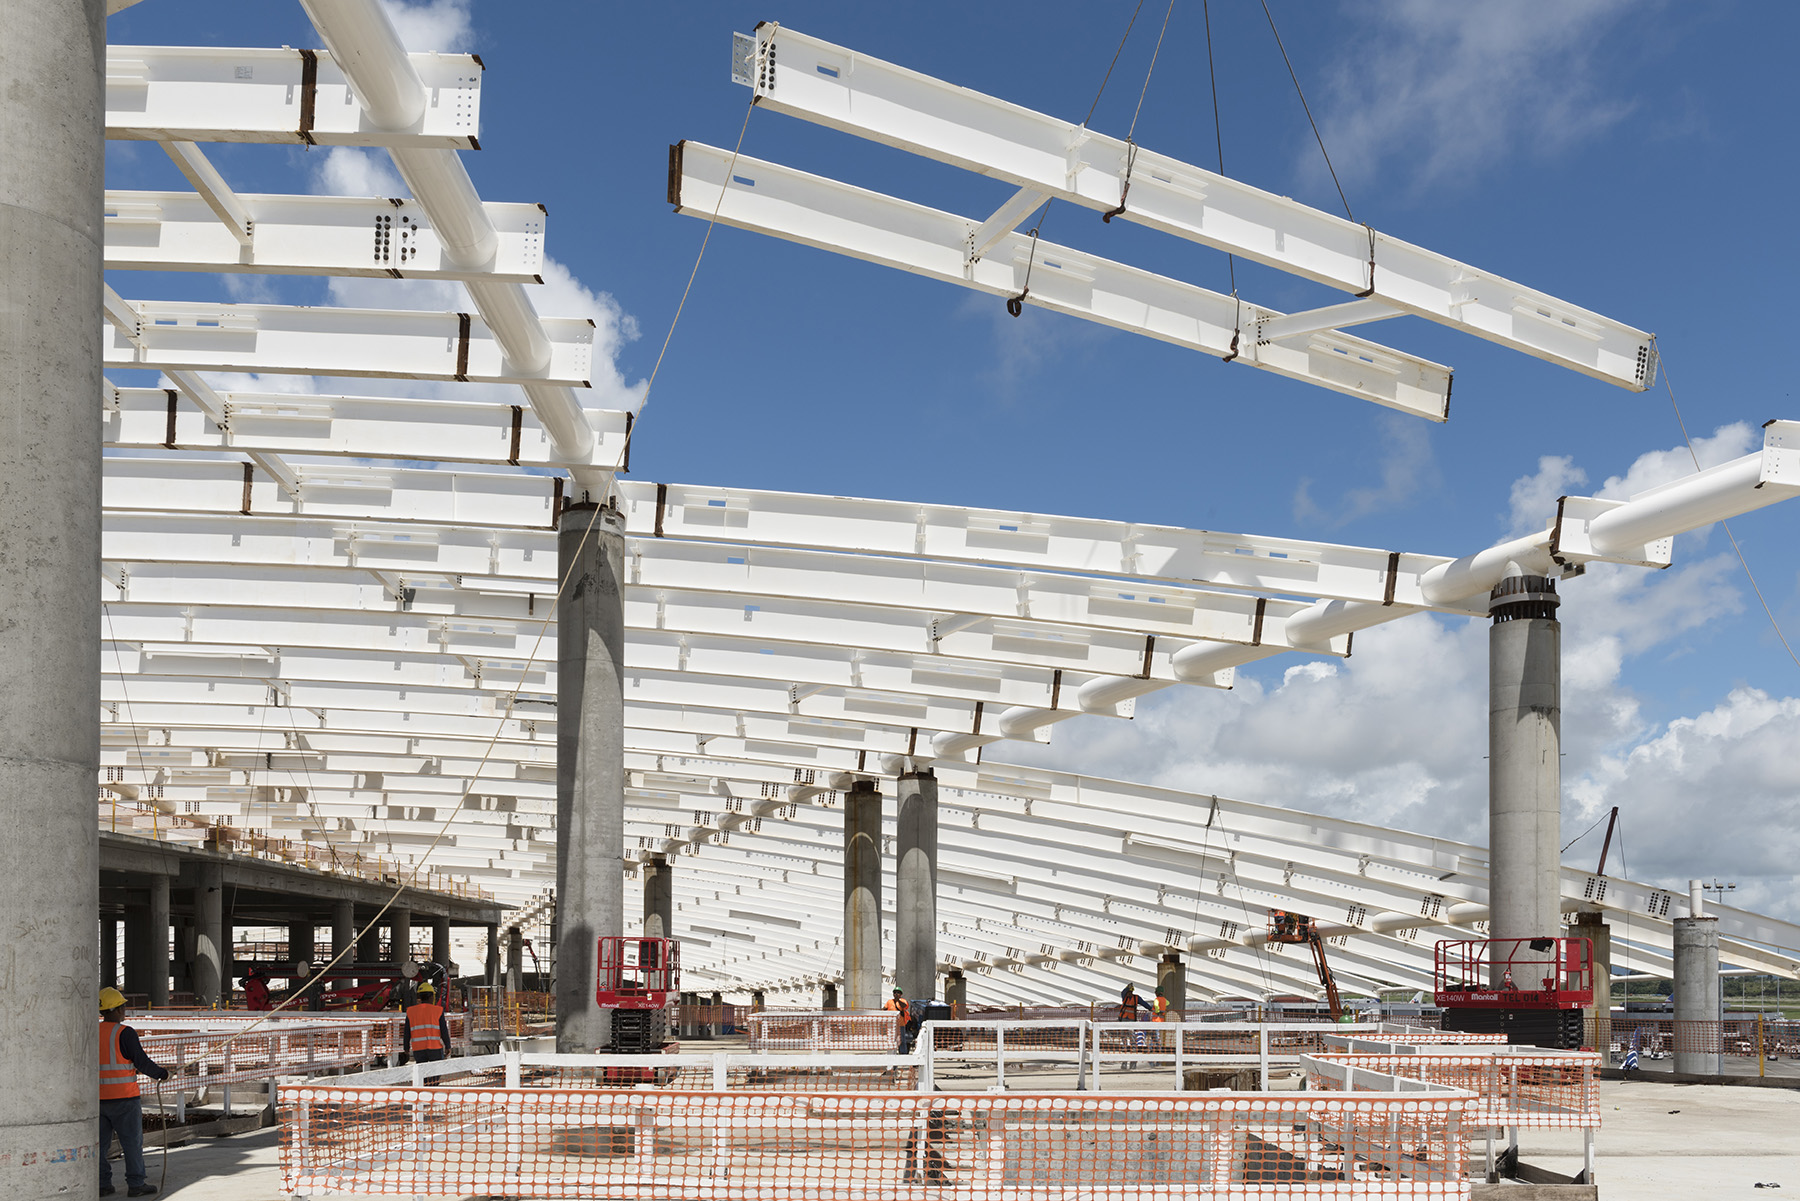 Photograph shows the white metal beams that form the roof of an airport terminal.